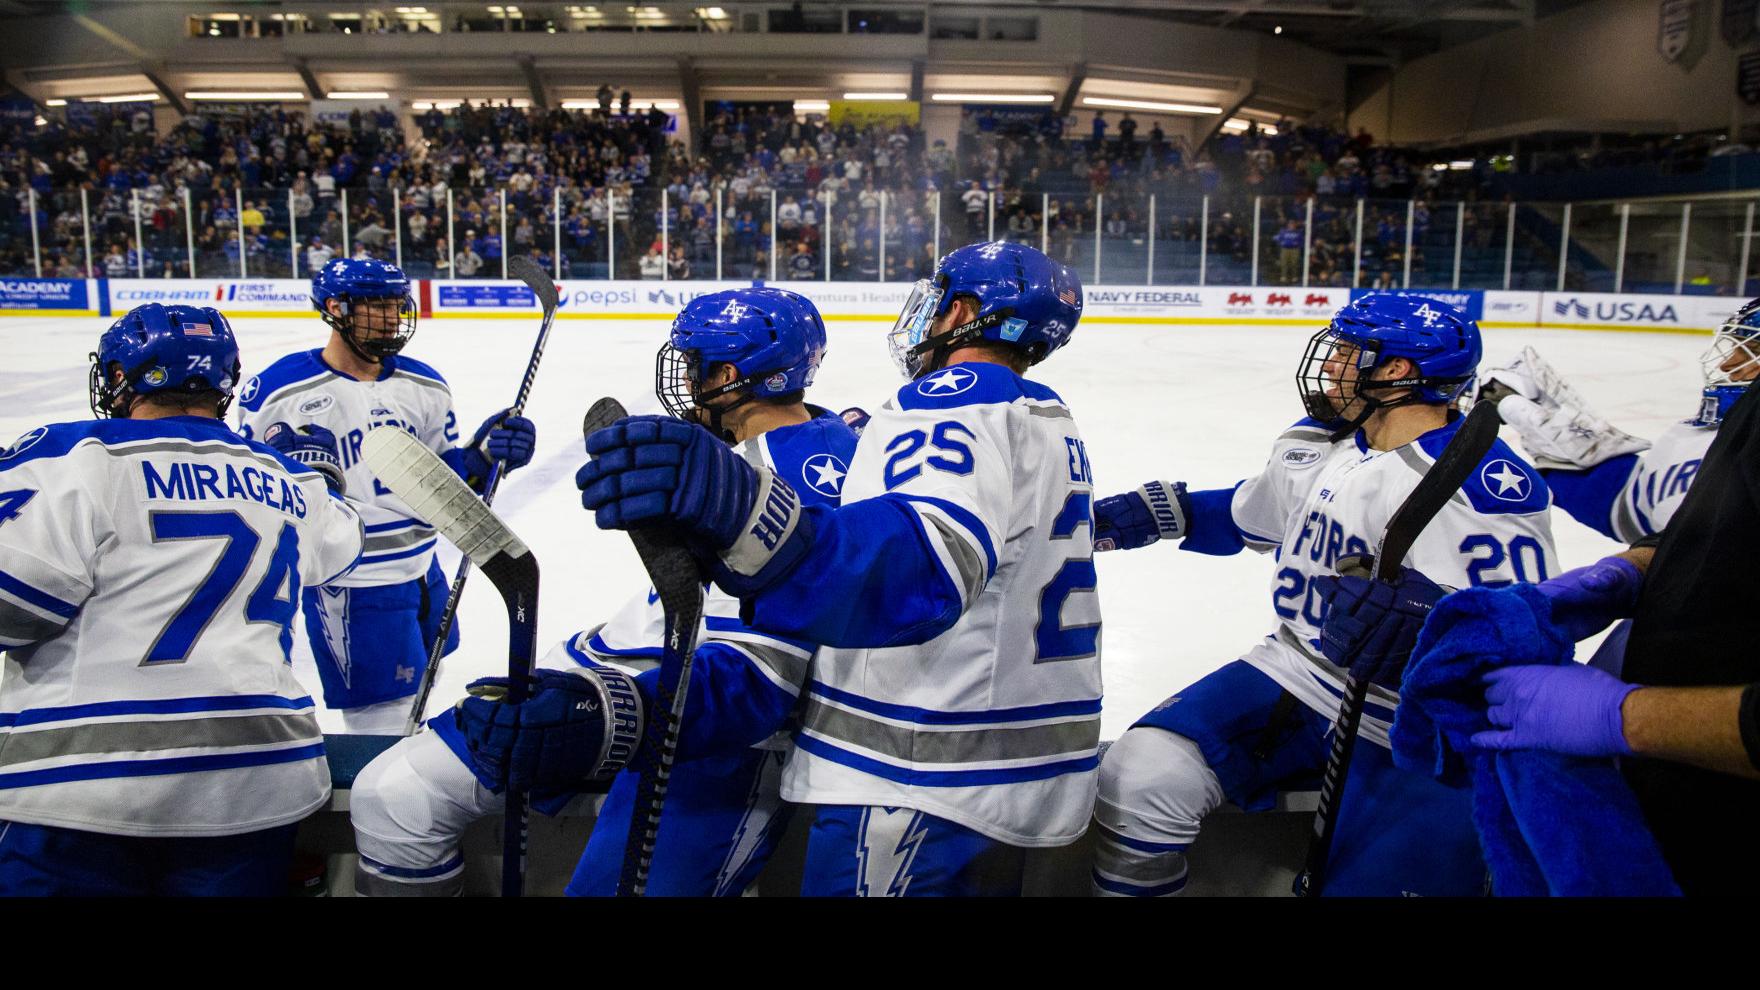 After shifting roles, Matt Pulver leads Air Force hockey onto ice